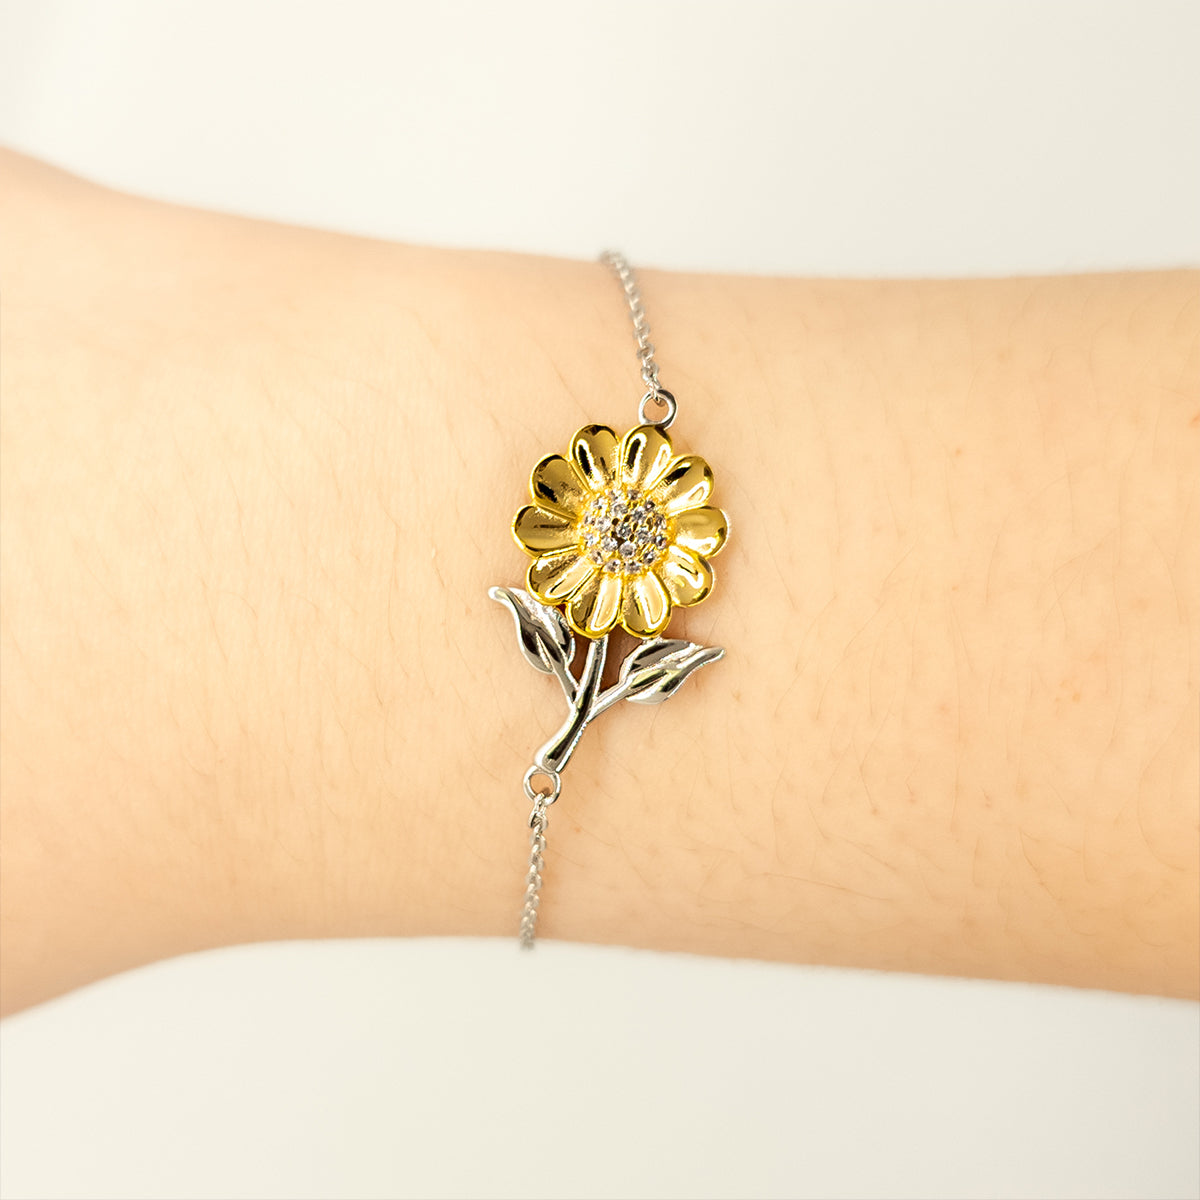 Sunflower Bracelet Pop-in-law Unique Engraved Gift for Mothers Day